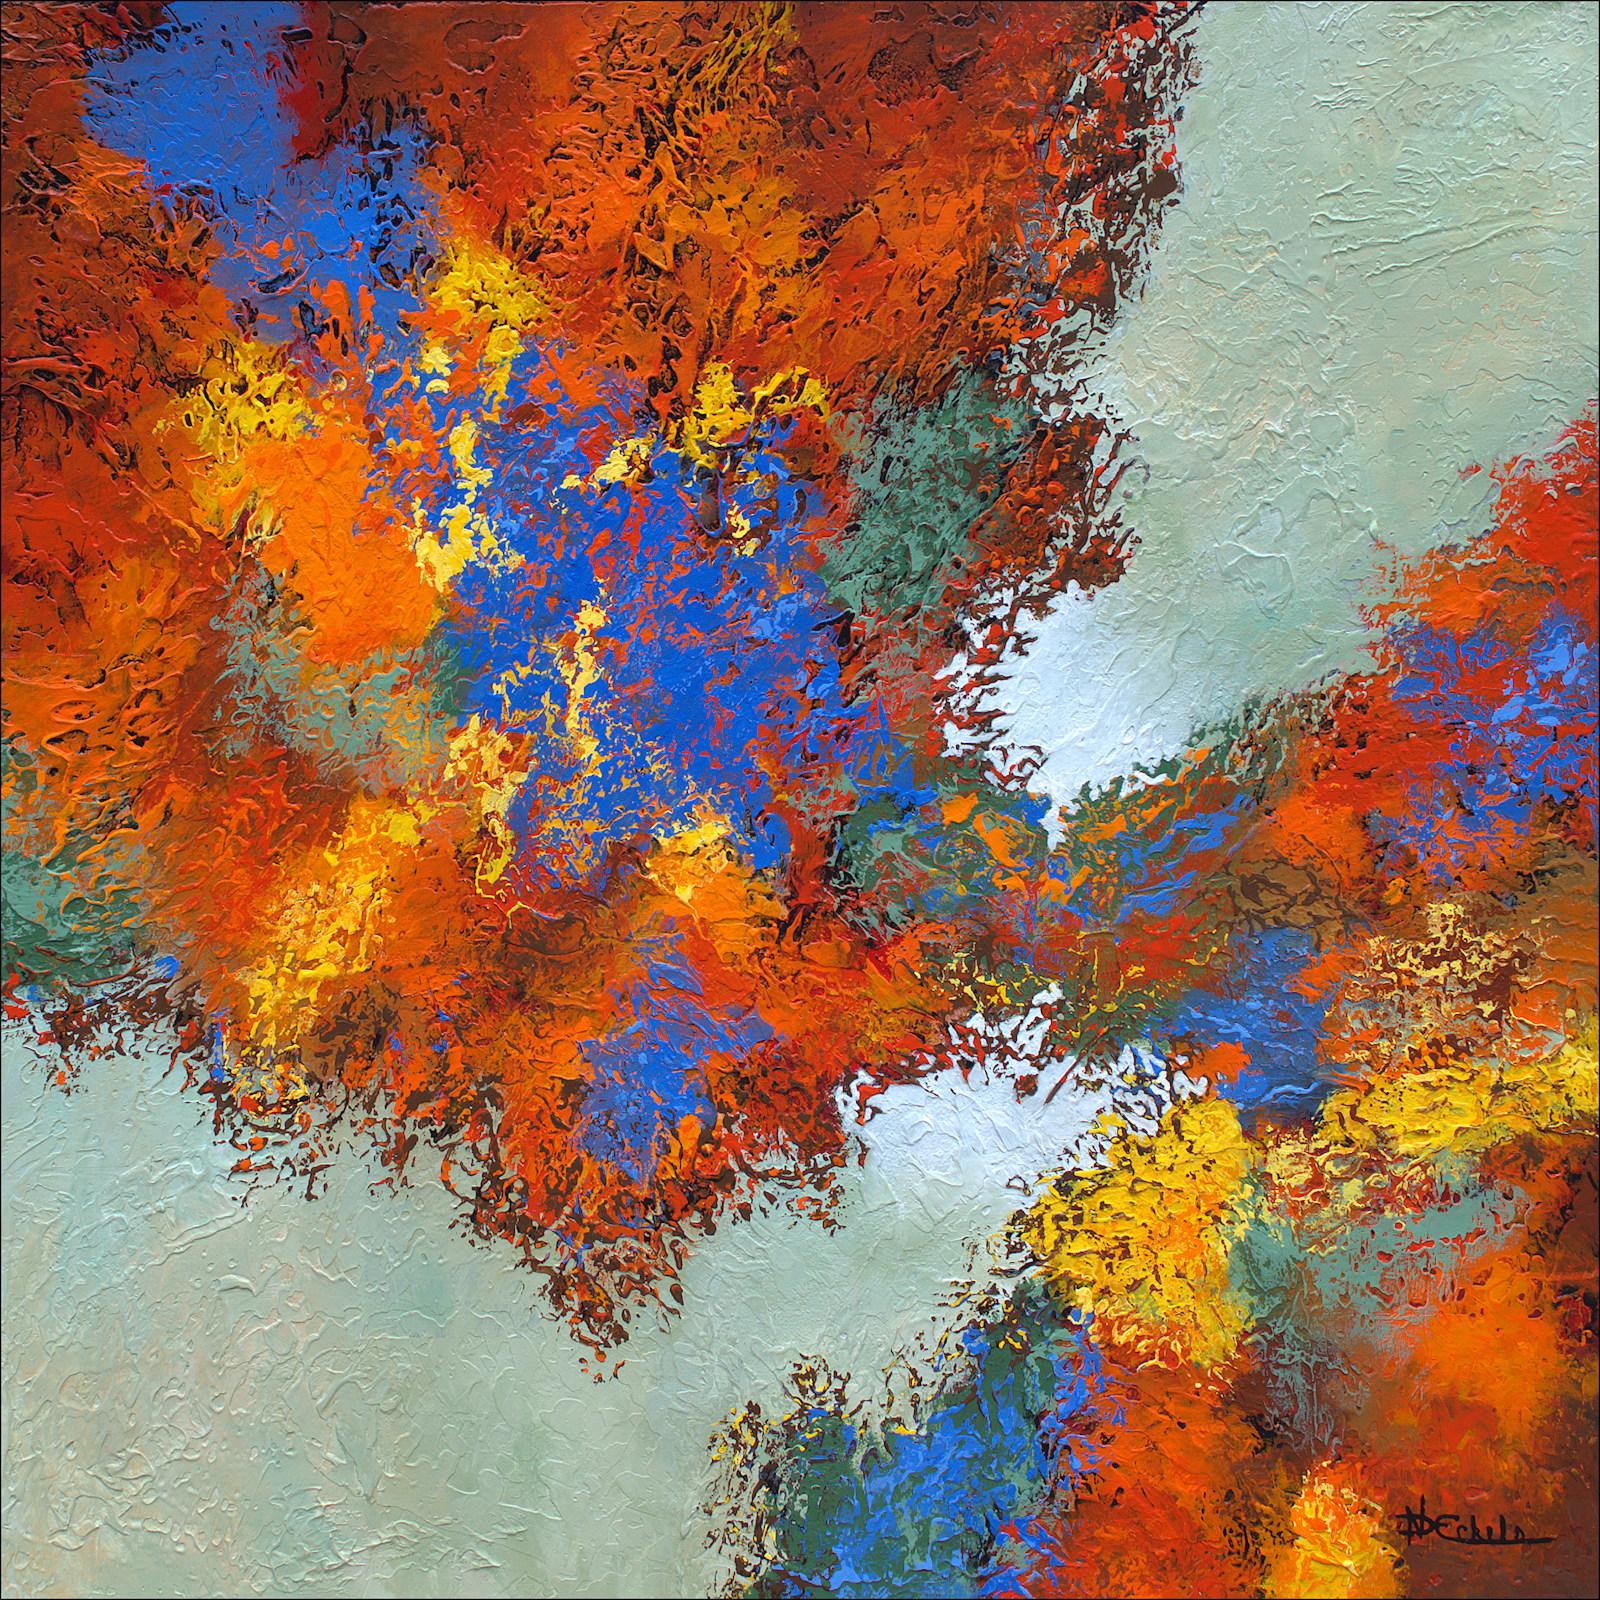 "Autumn Sky  Mixed Media abstract with textural golds, blue, red and lavender  - Mixed Media Art by Nancy Eckels